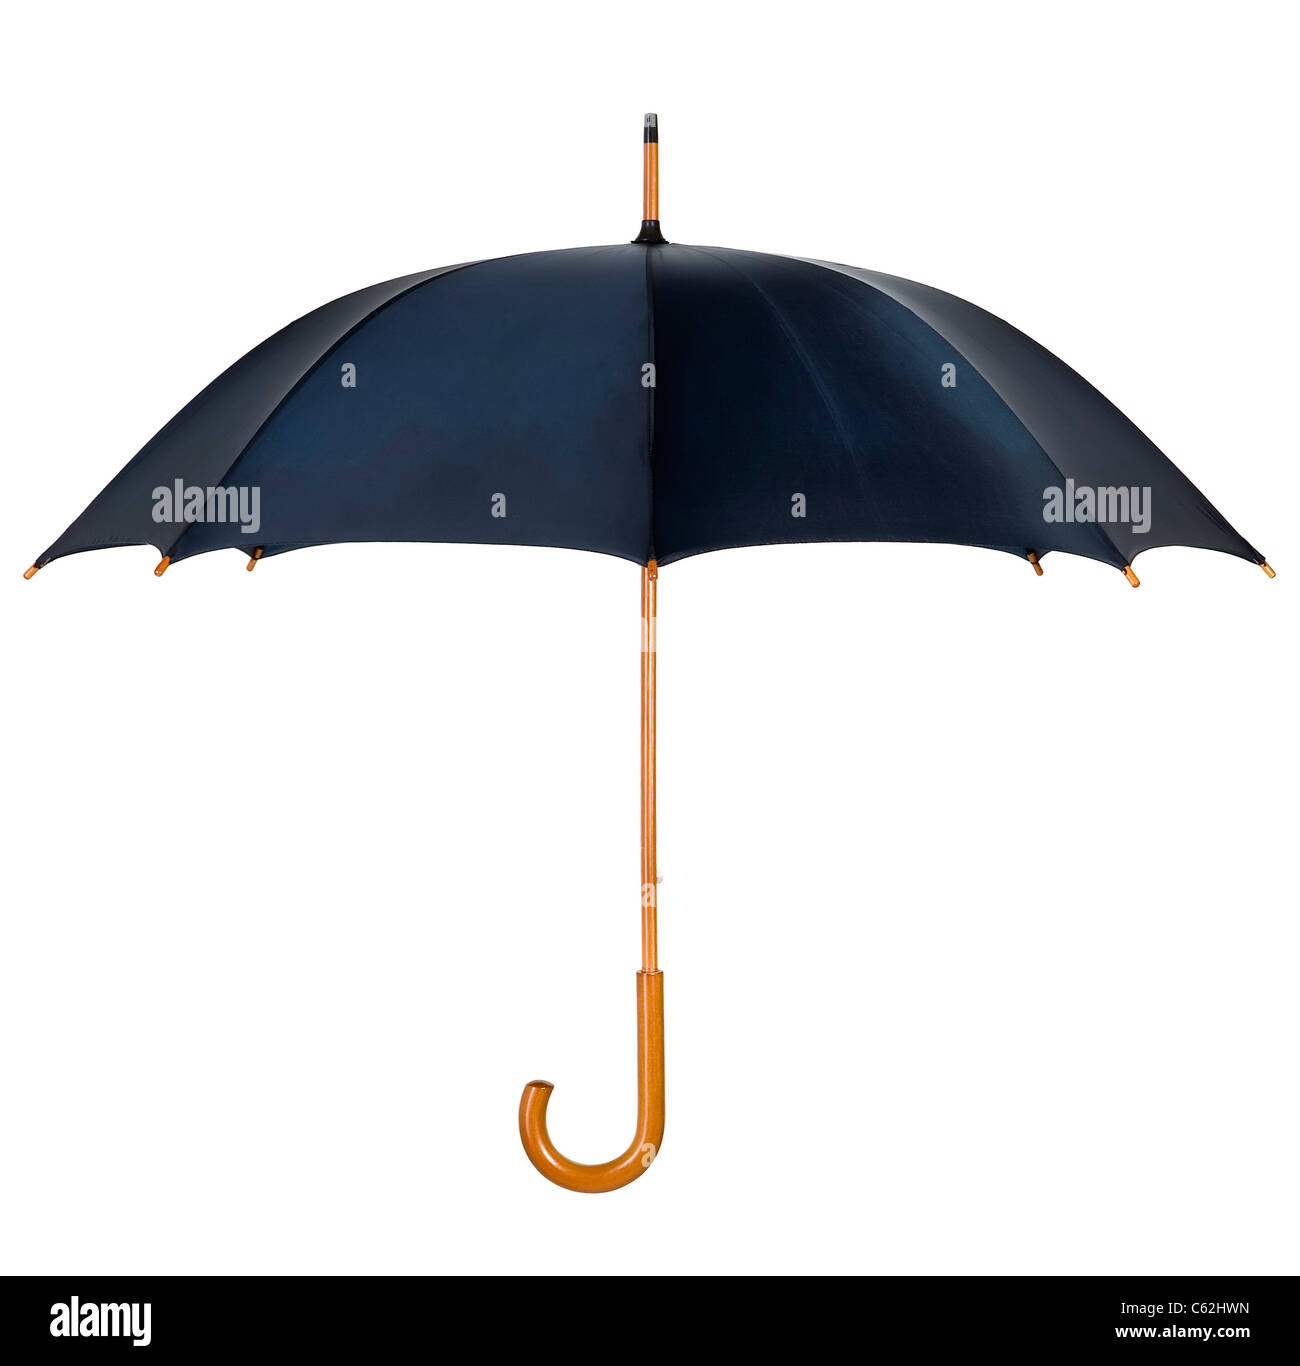 Black umbrella with wooden shank and handle Stock Photo